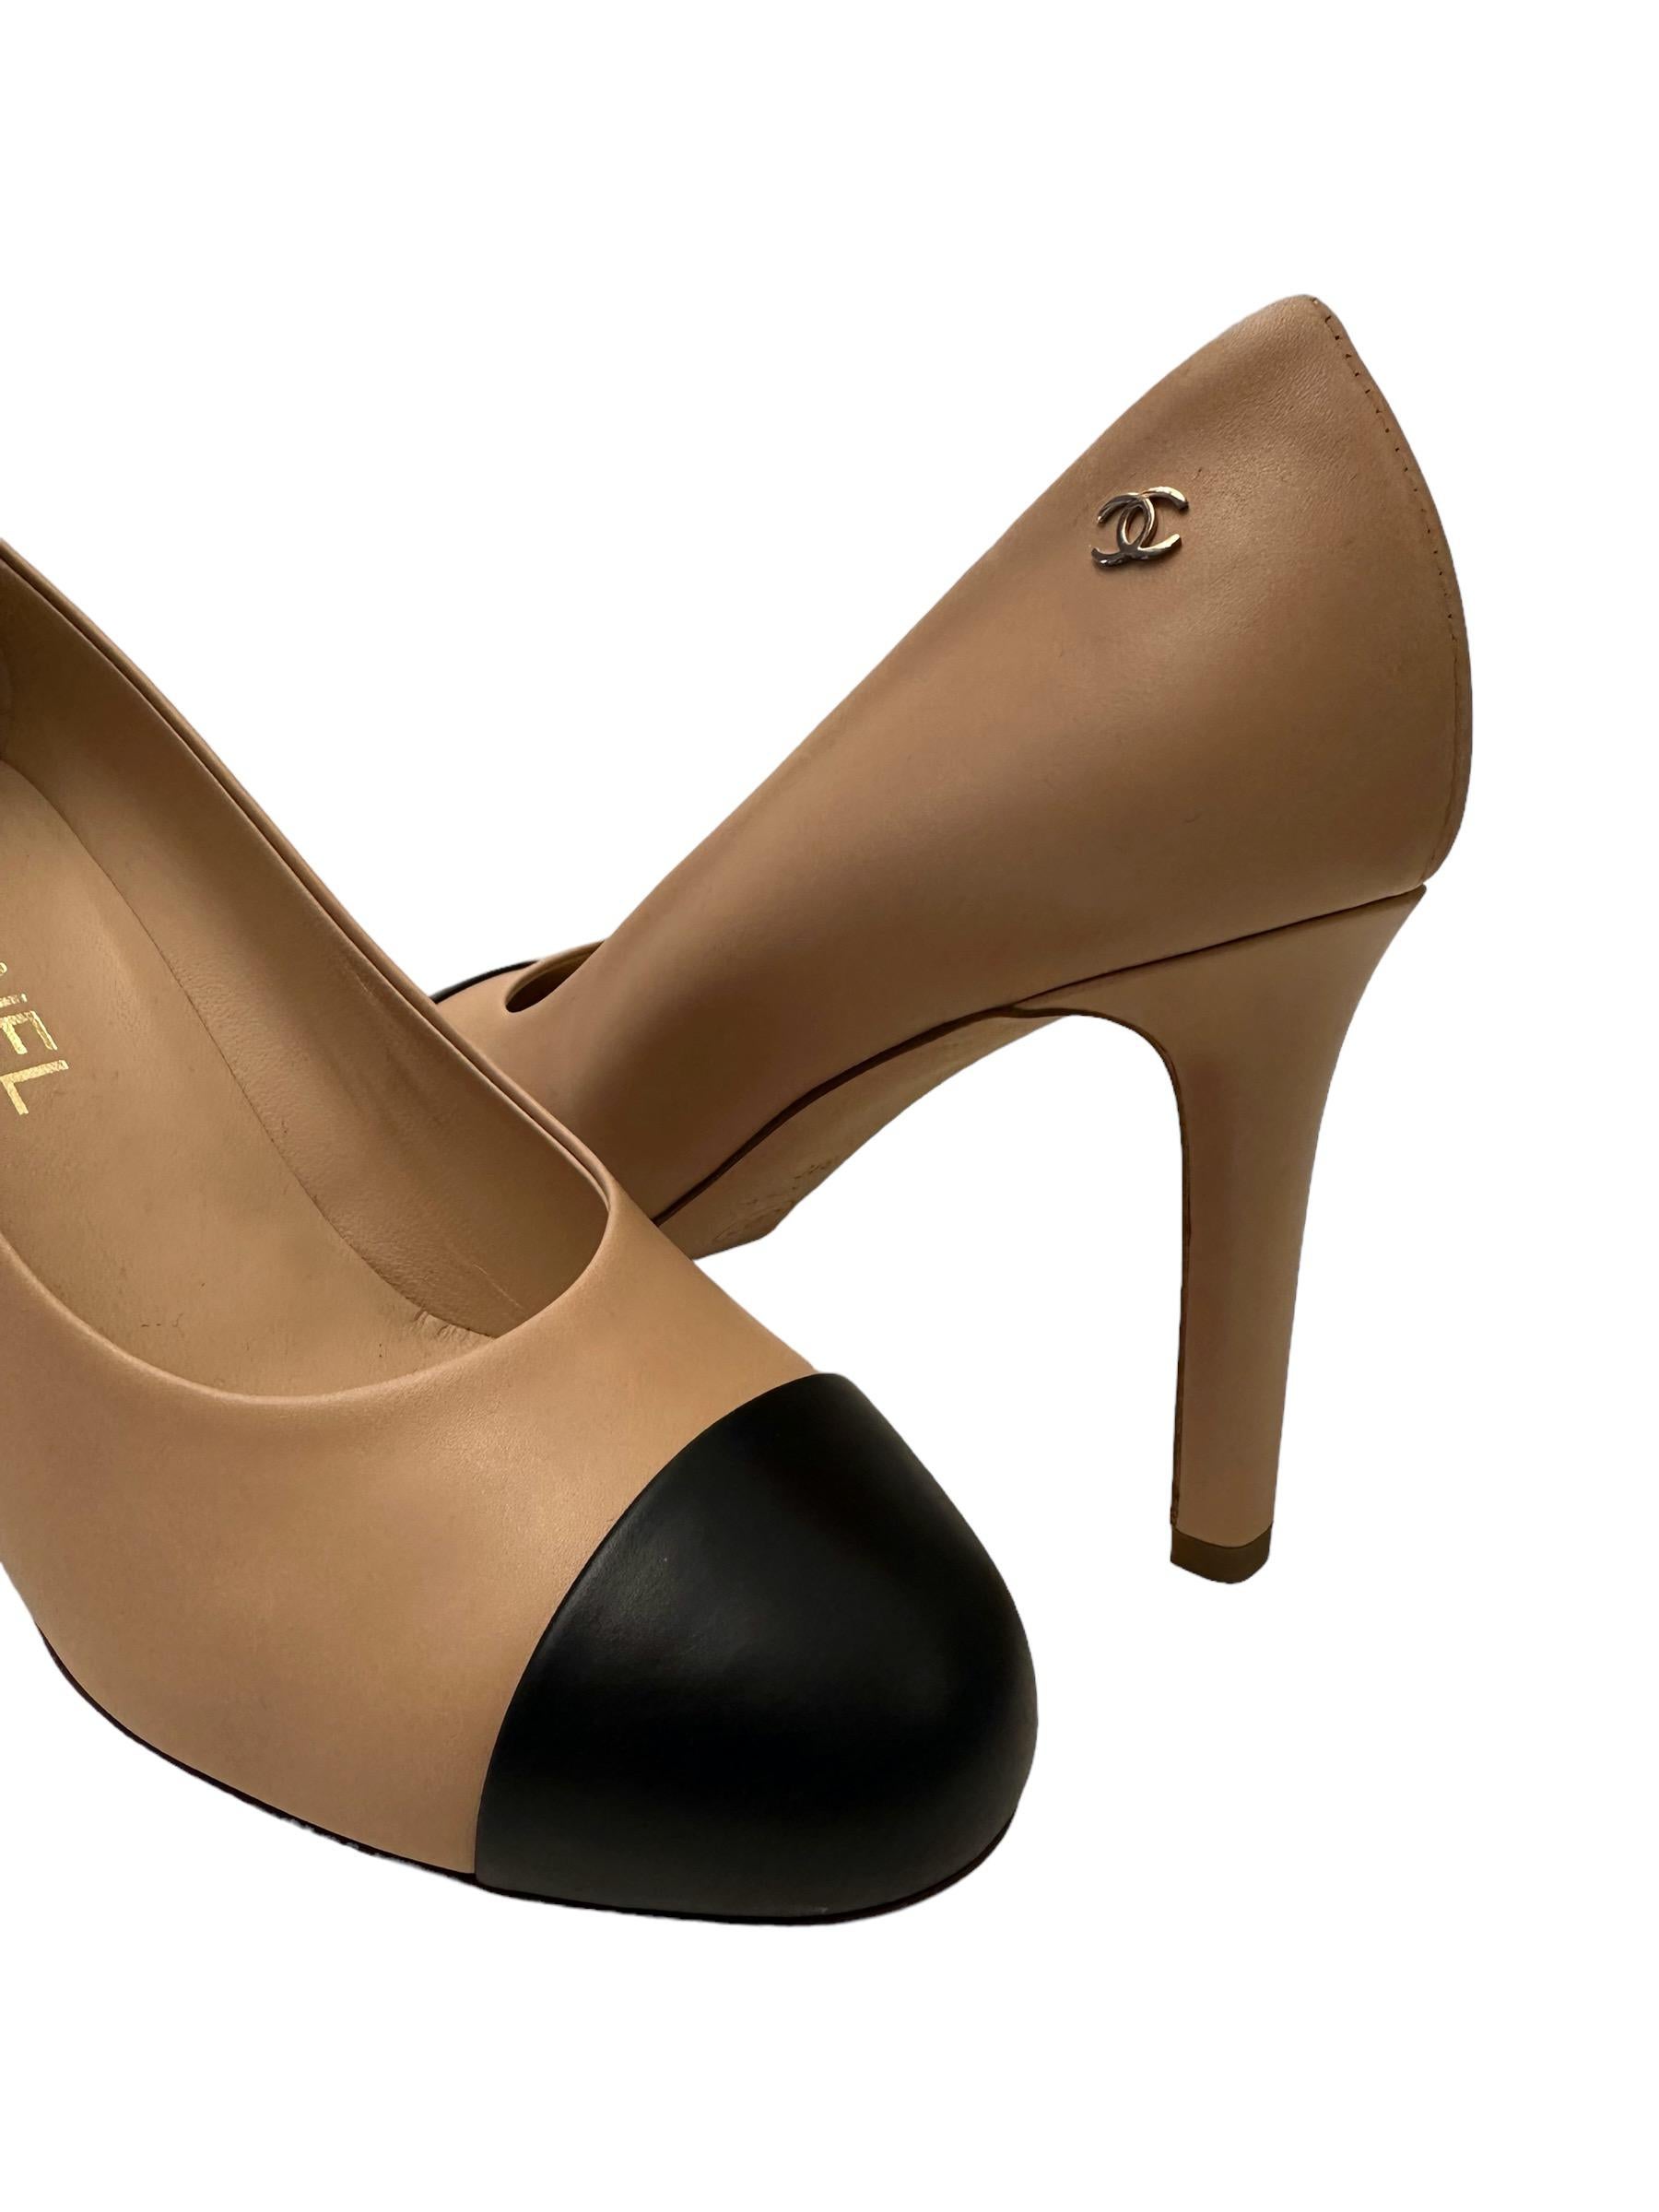 Beautiful classic two tone pumps from the house of Chanel.
Crafted in beige leather with a black toe-cap. A small gold finish CC logo on the side.
Pre-owned but in new condition !!!

Material: Leather
Color: Beige and black
Sole: Leather
Insole: